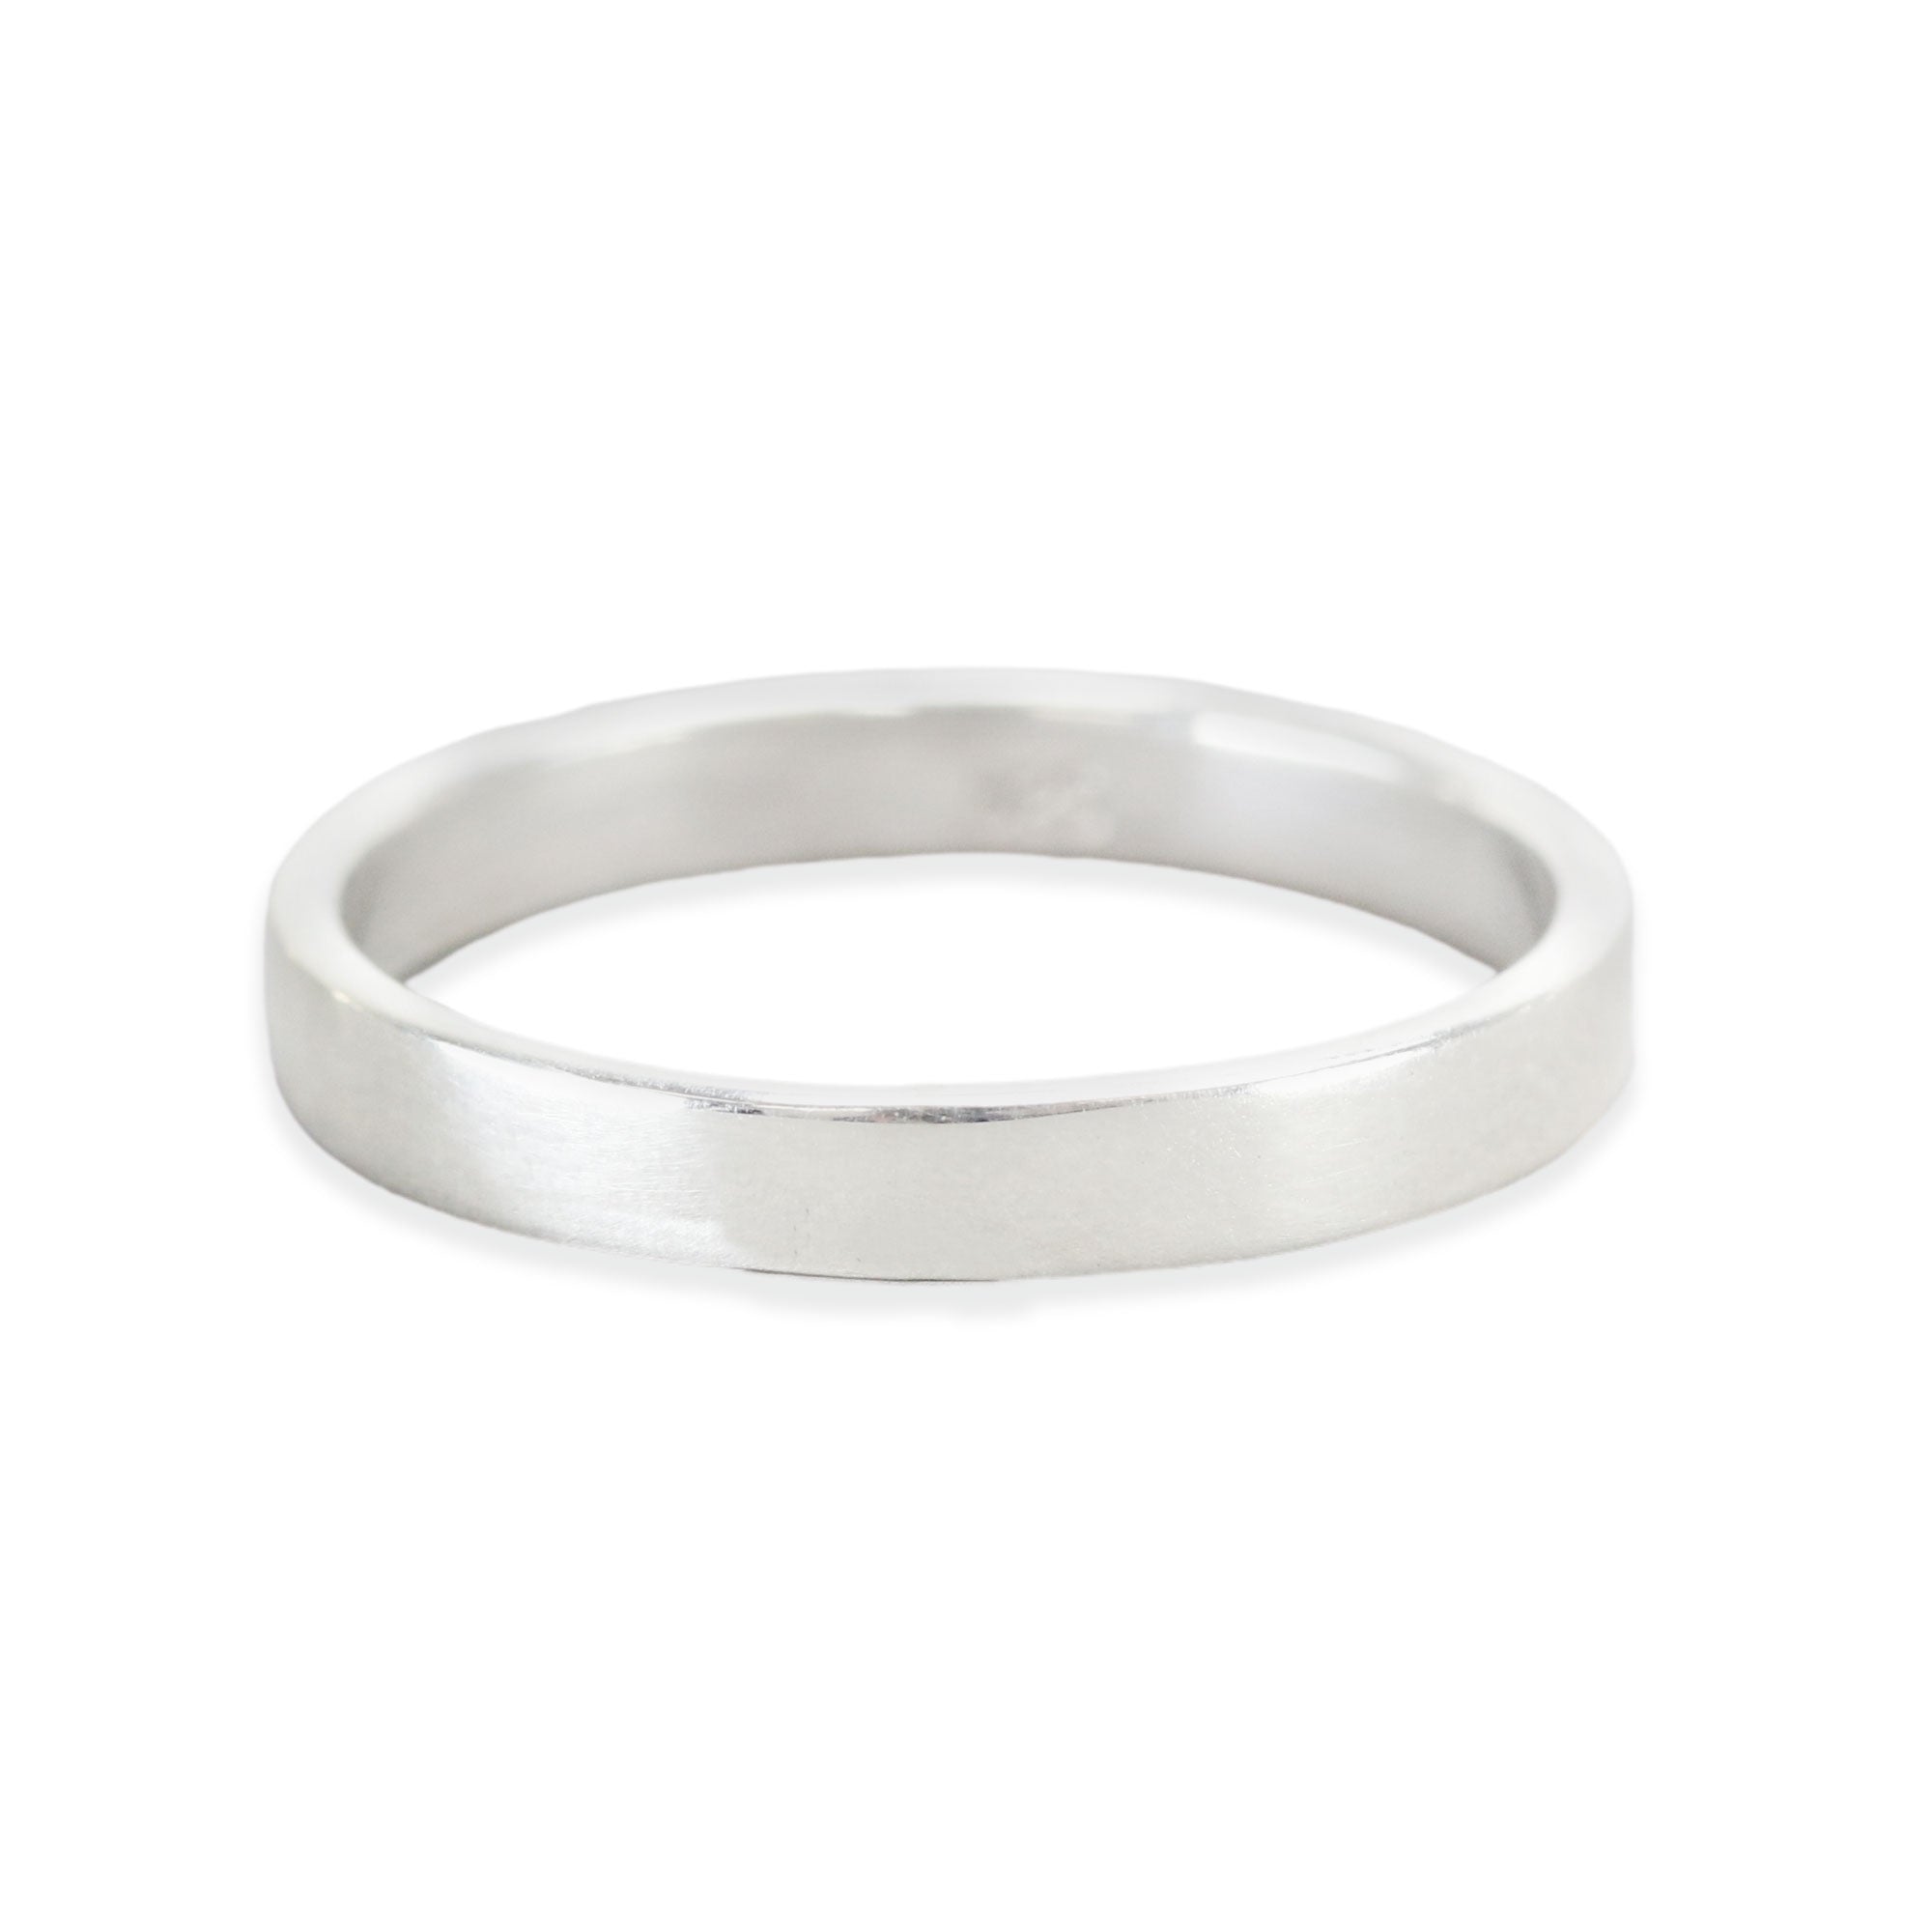 Sterling Silver 925 Blank Ring with Rectangle Base for Stamping and Engraving Size 6Us